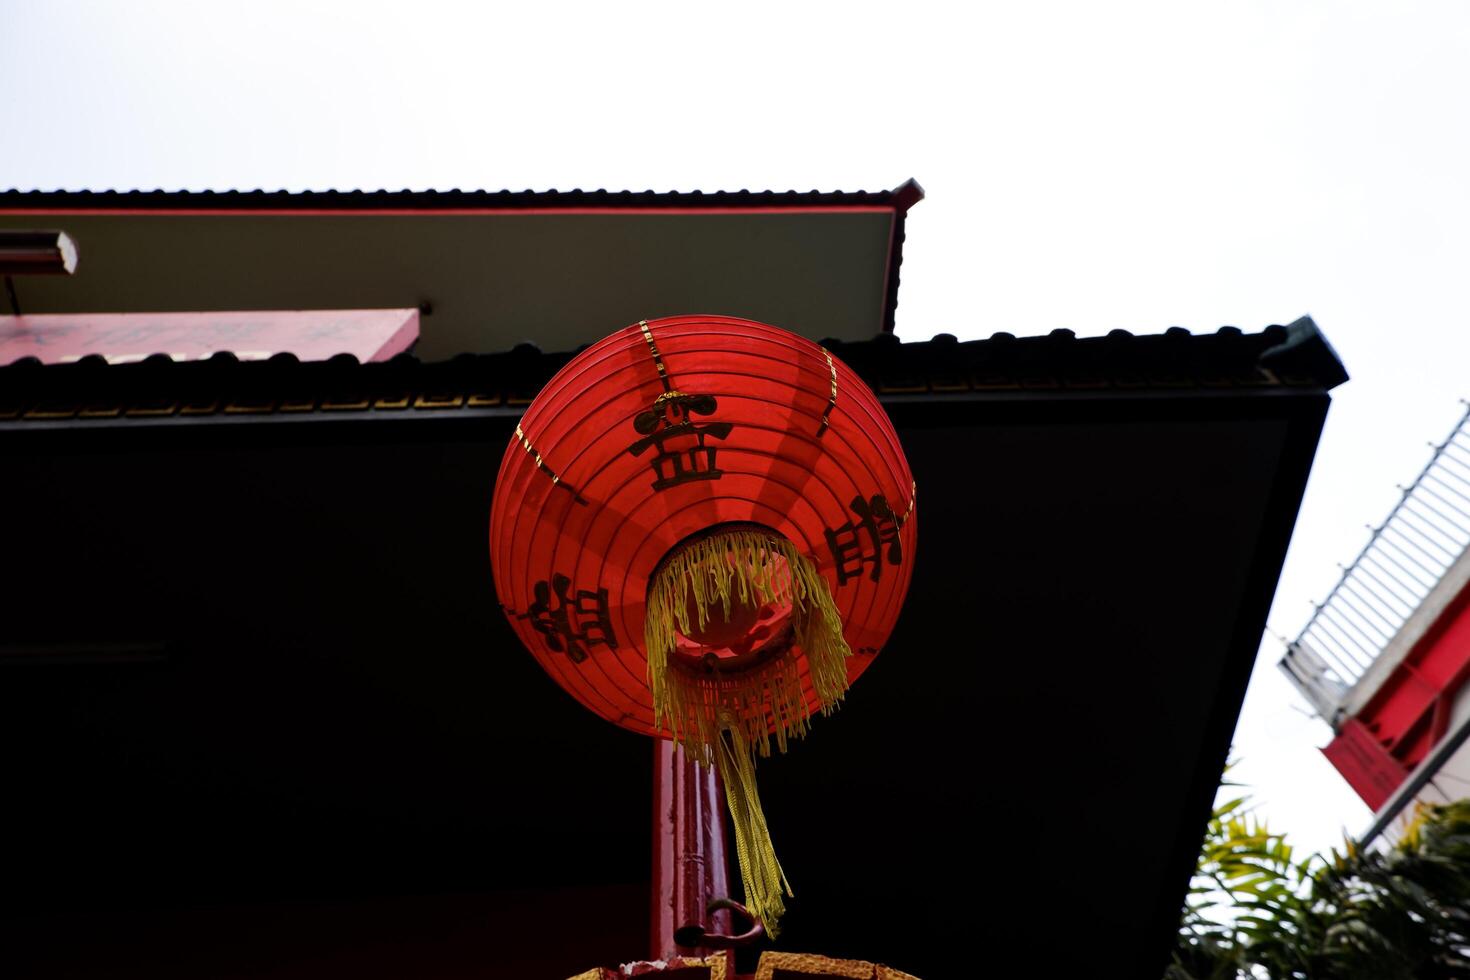 Selective focus of lantern lights that decorate during Chinese New Year. Great for Chinese New Year celebrations. photo